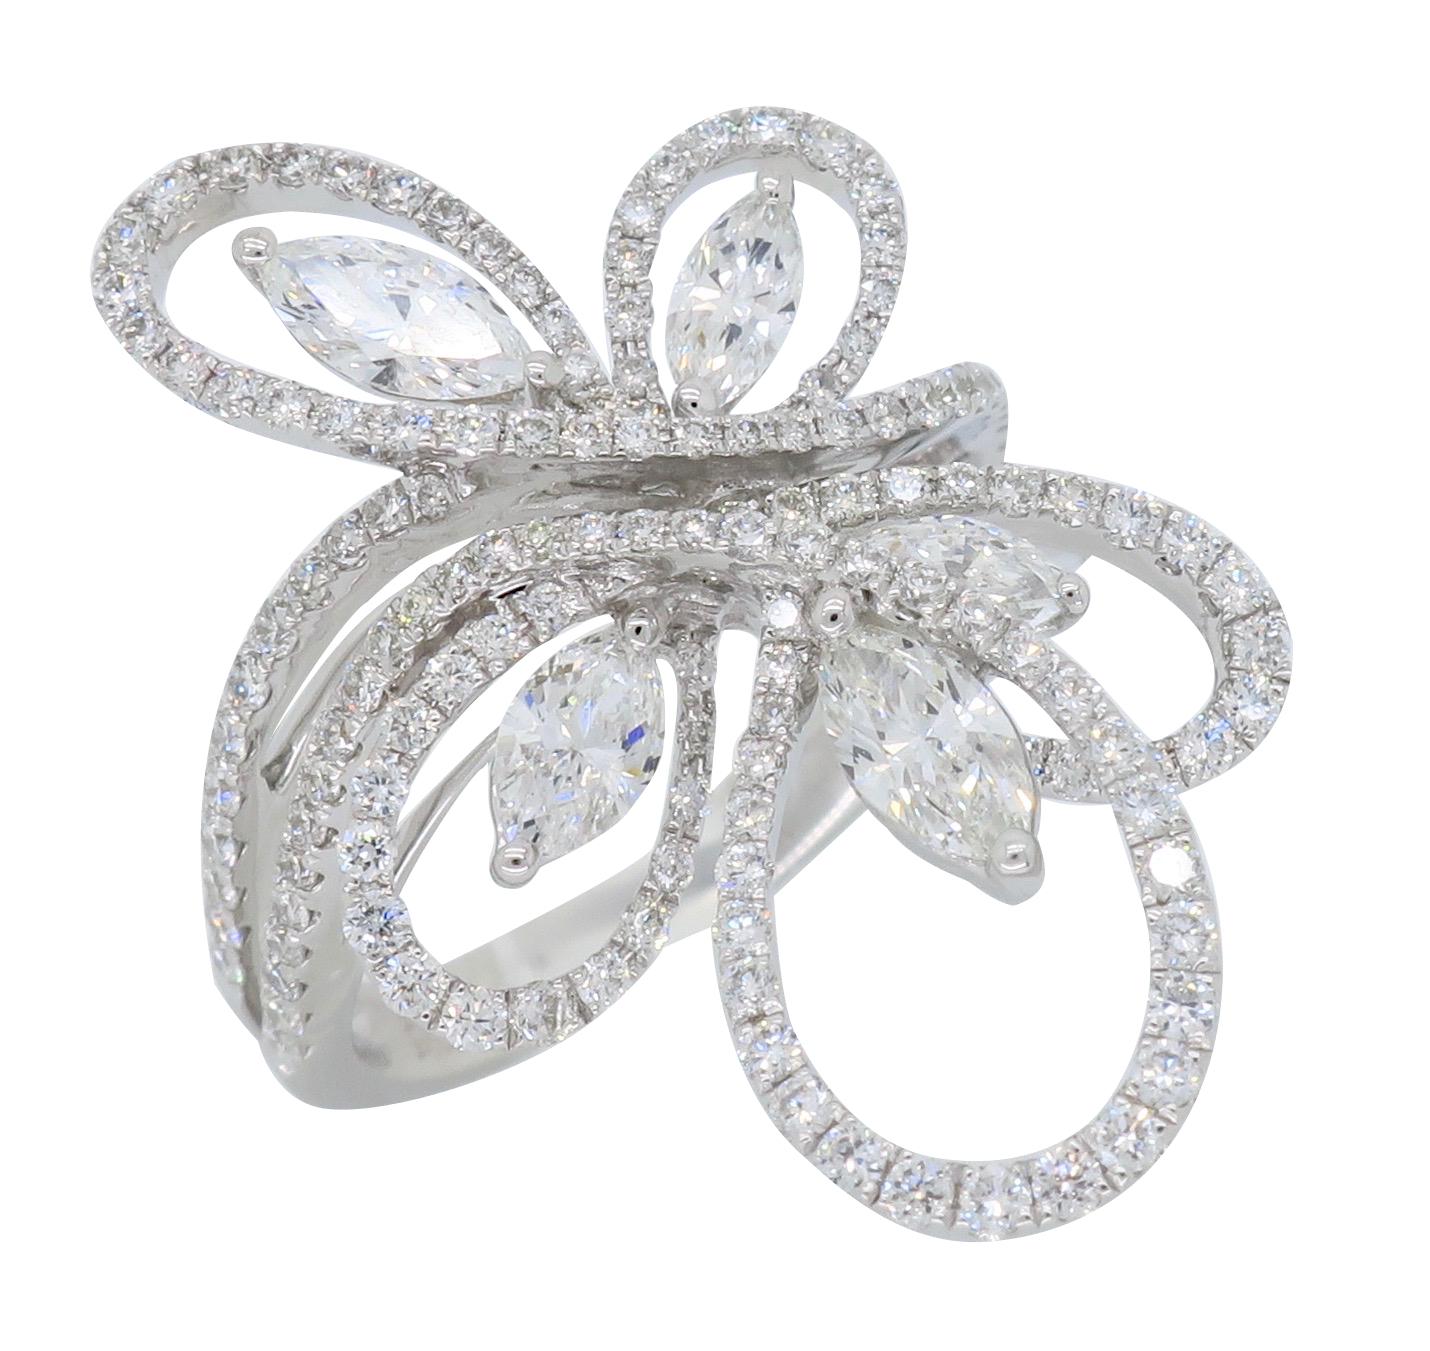 Floral Design Abstract Diamond Fashion Ring 6